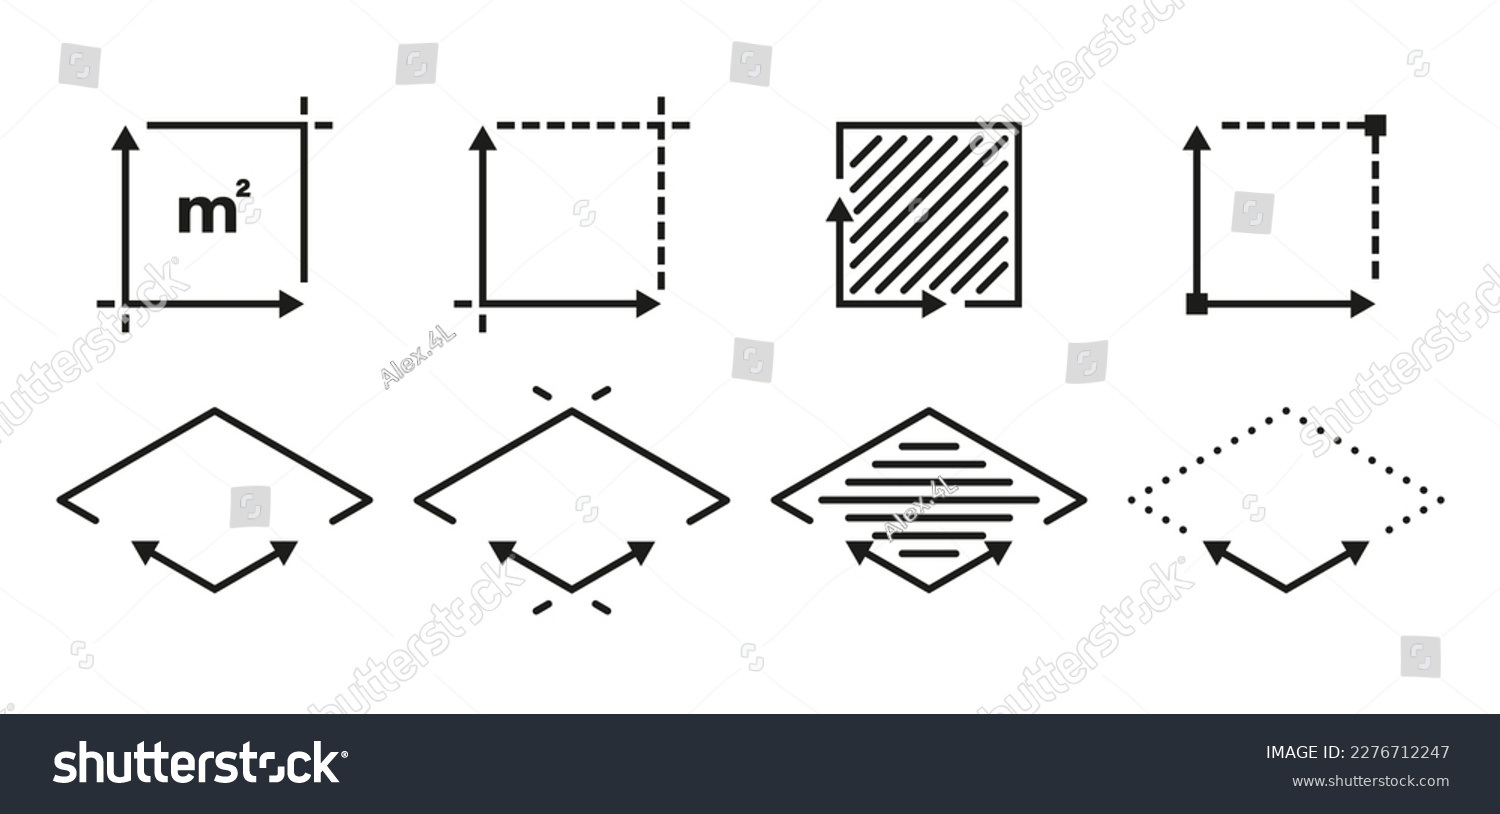 Square meter icons set isolated on white background. Measuring land area symbol. Vector illustration. #2276712247